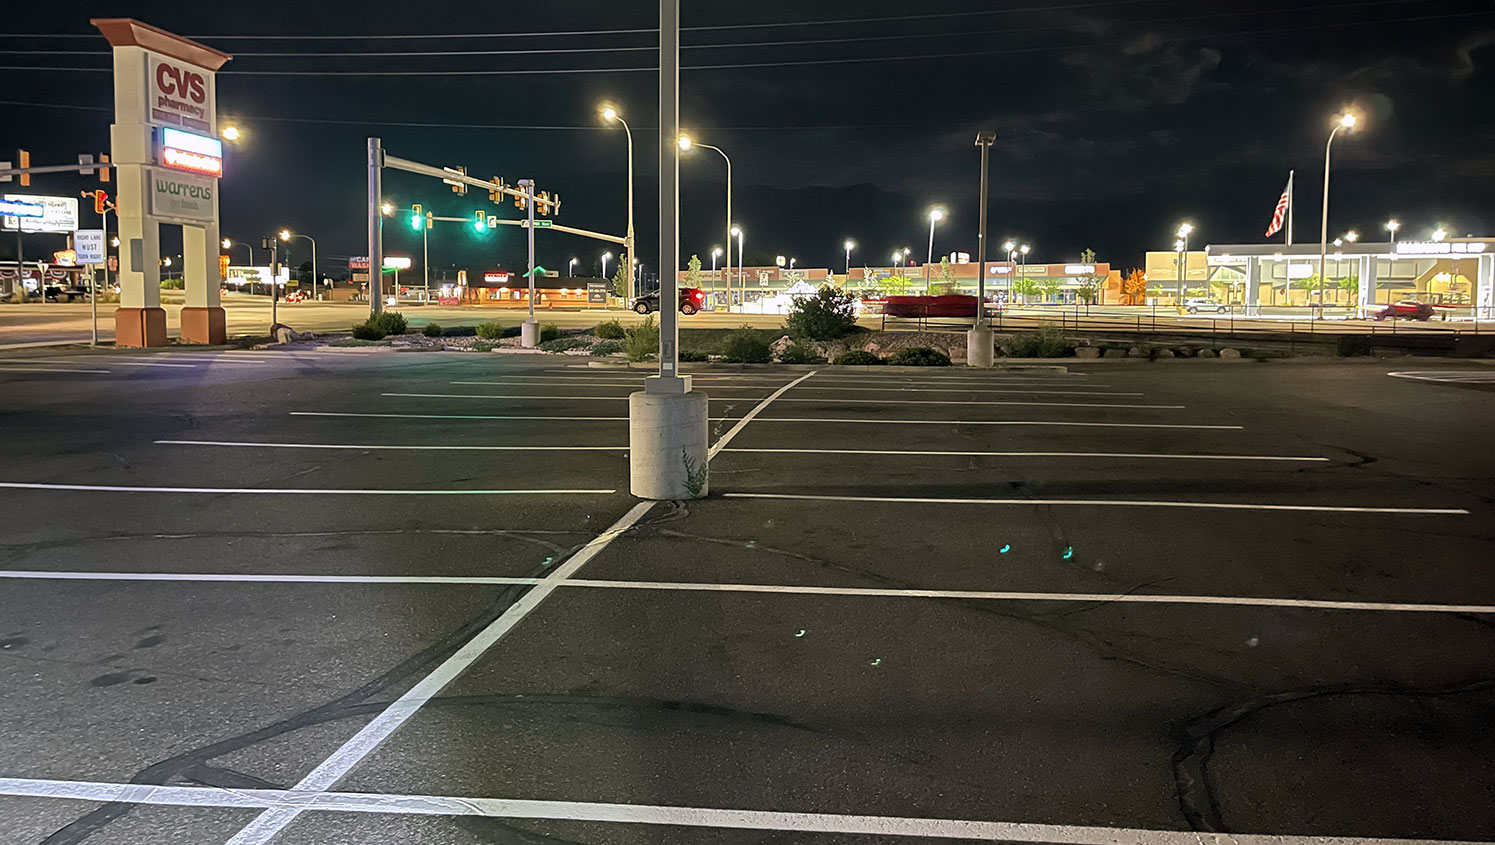 New parking lot stalls striped at a CVS in Roy, UT